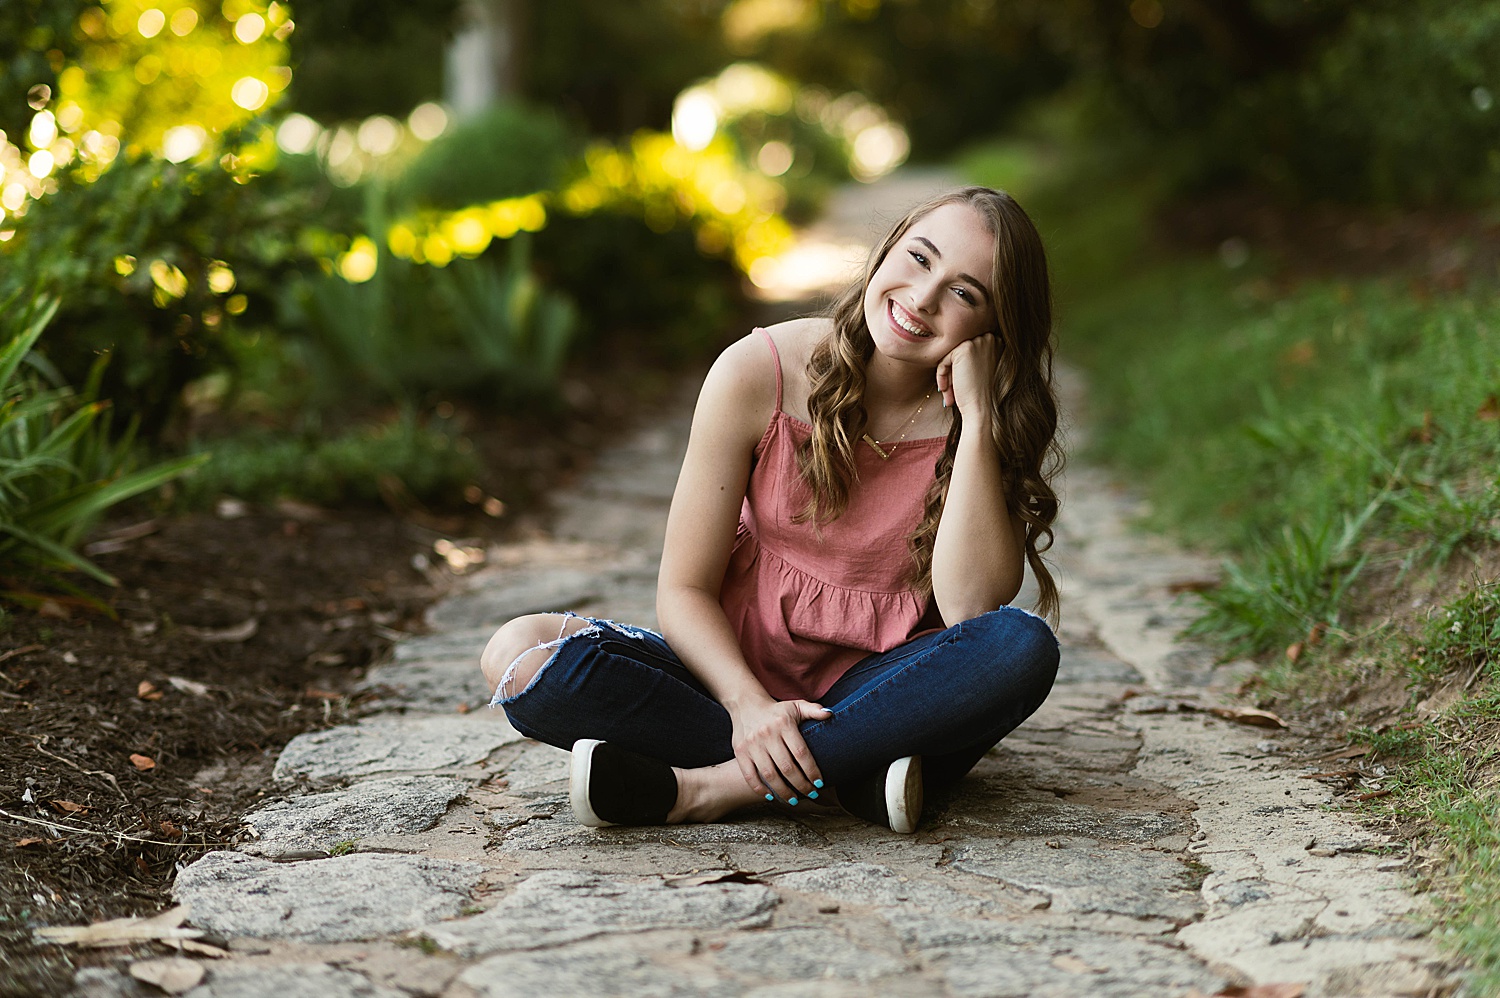 Girl in jeans and rose colored top sitting on pathway for Golden Hour Session 